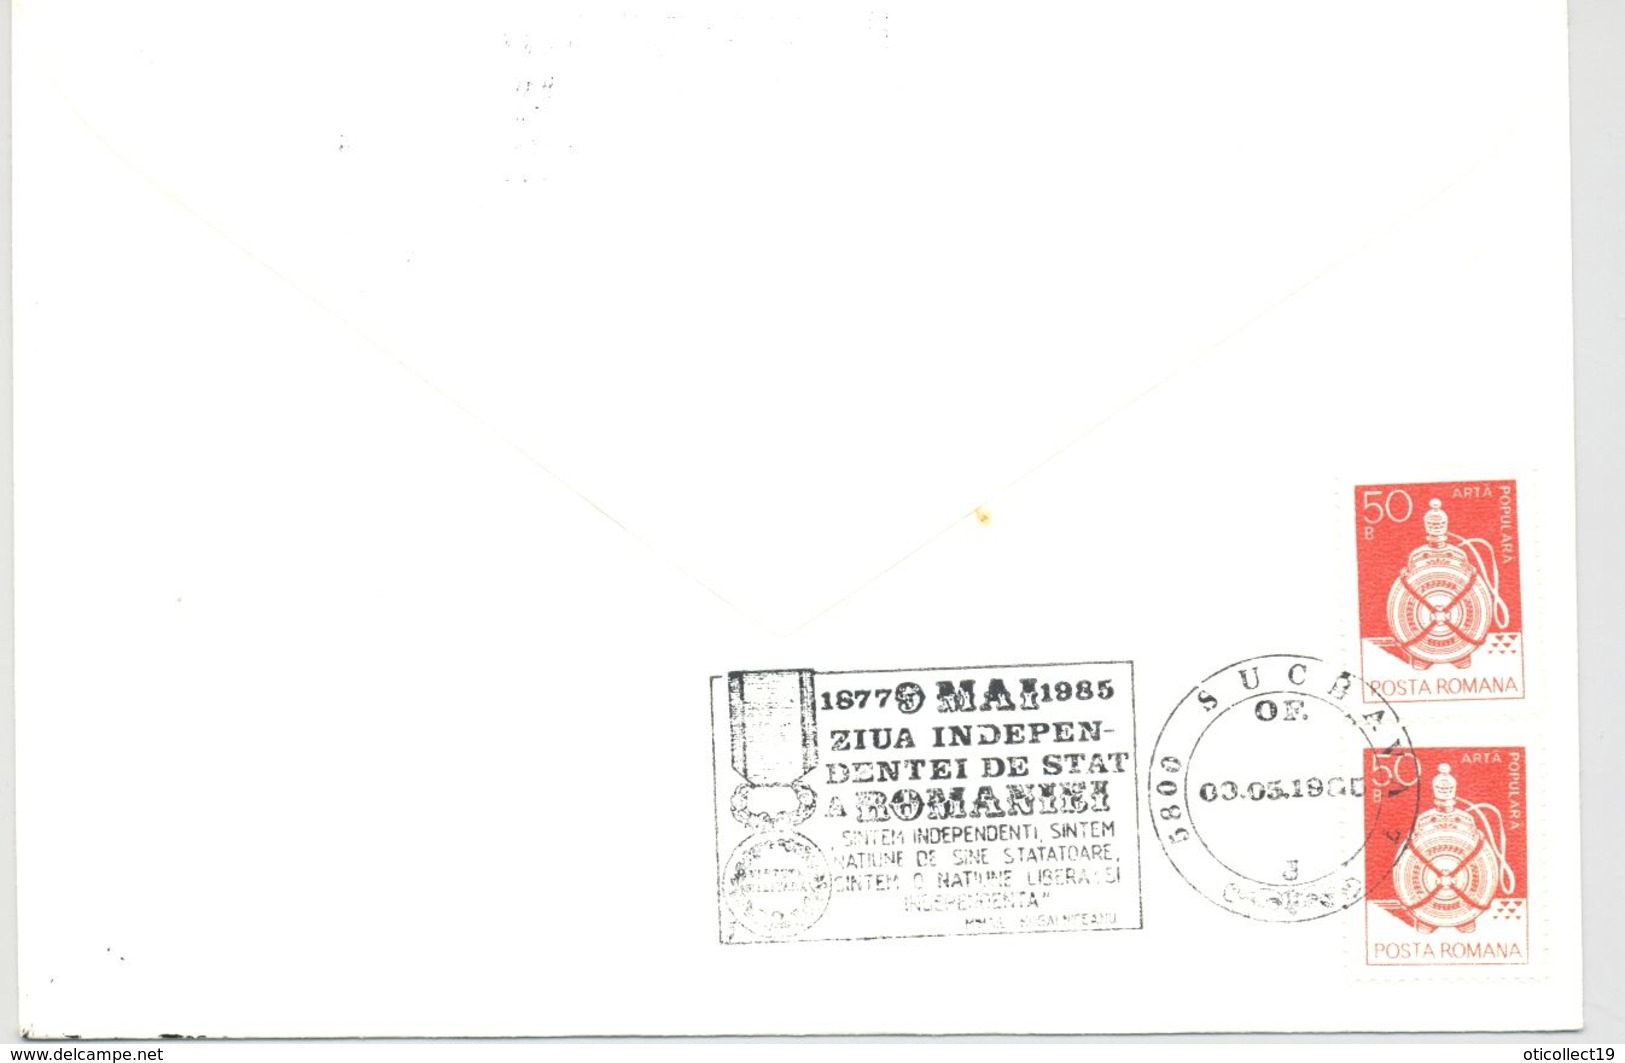 ROMANIAN STATE INDEPENDENCE ANNIVERSARY, SPECIAL POSTMARK ON COVER, POTTERY STAMP, 1985, ROMANIA - Cartas & Documentos